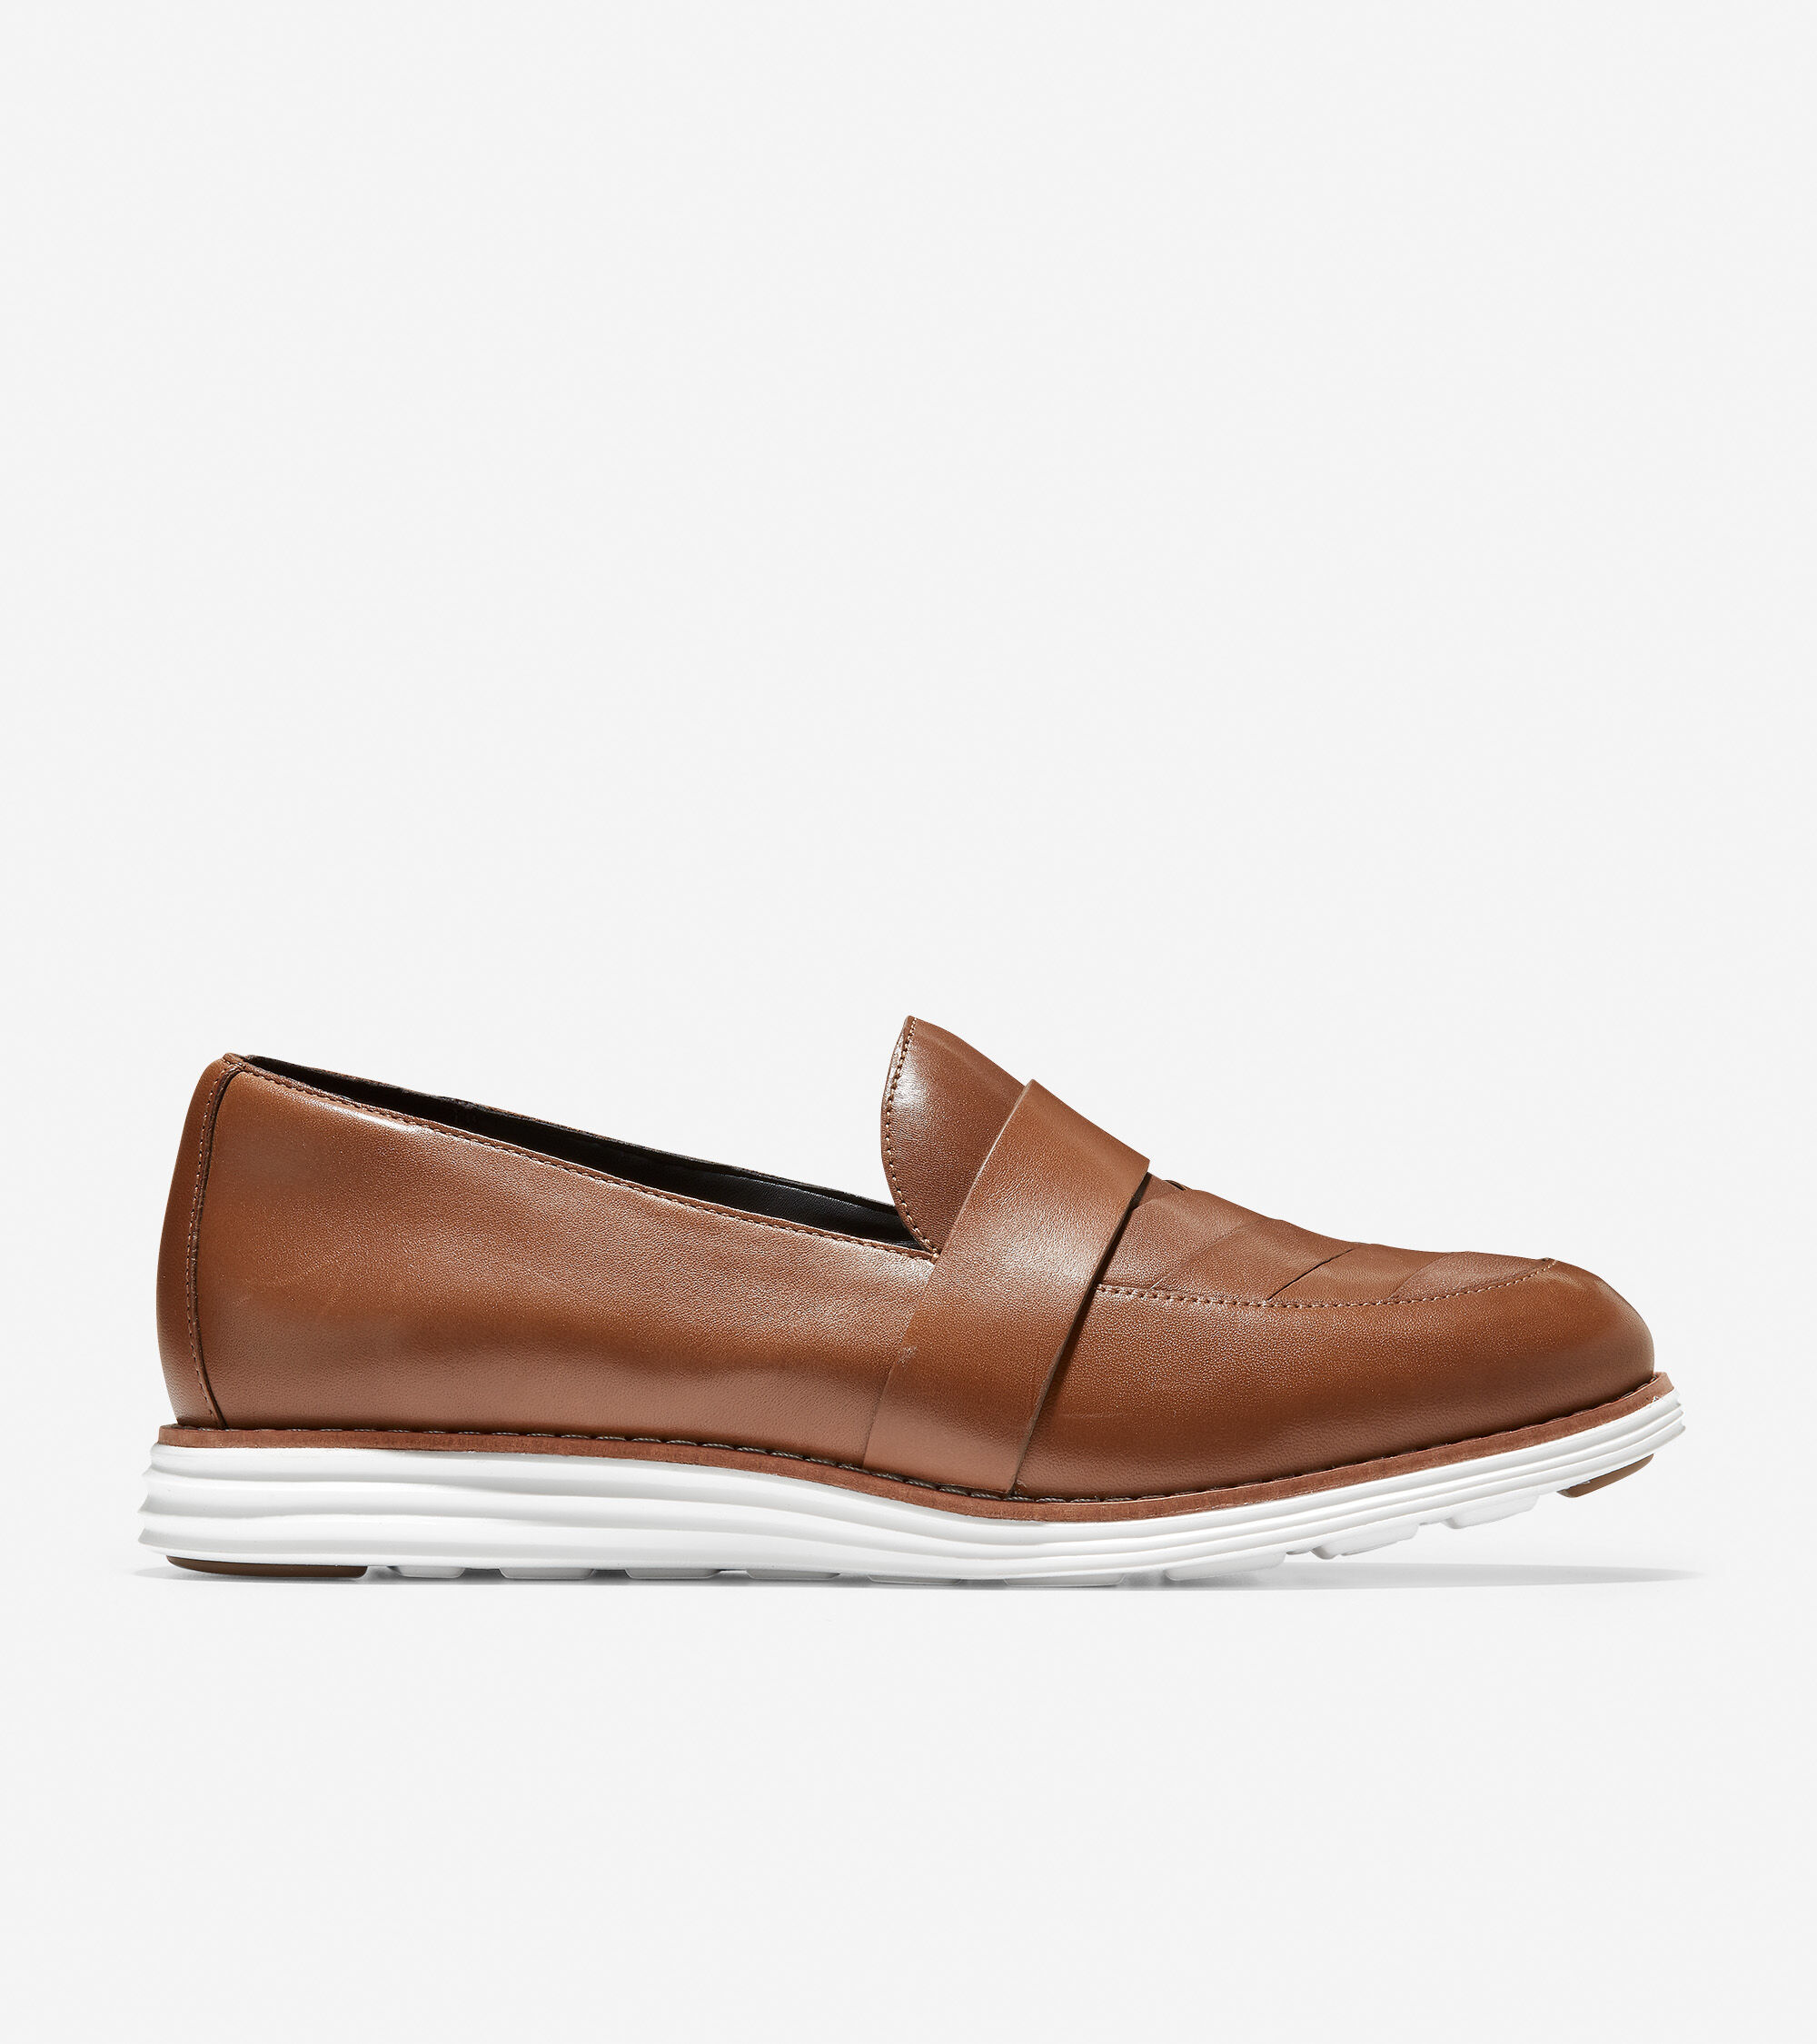 cole haan driving shoes womens